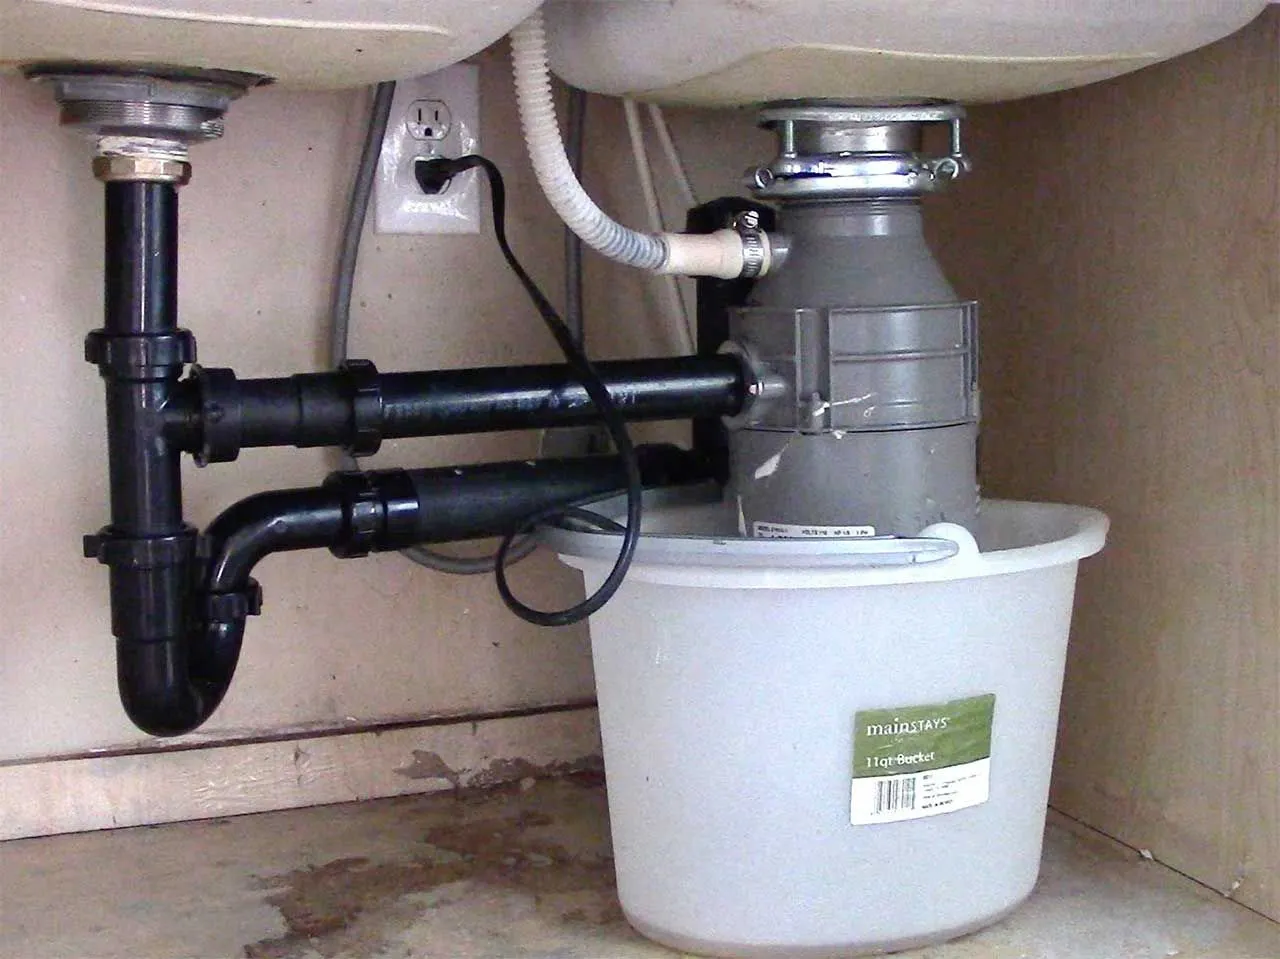 How to Fix a Leaking Garbage Disposal - Healthy Kitchen 101